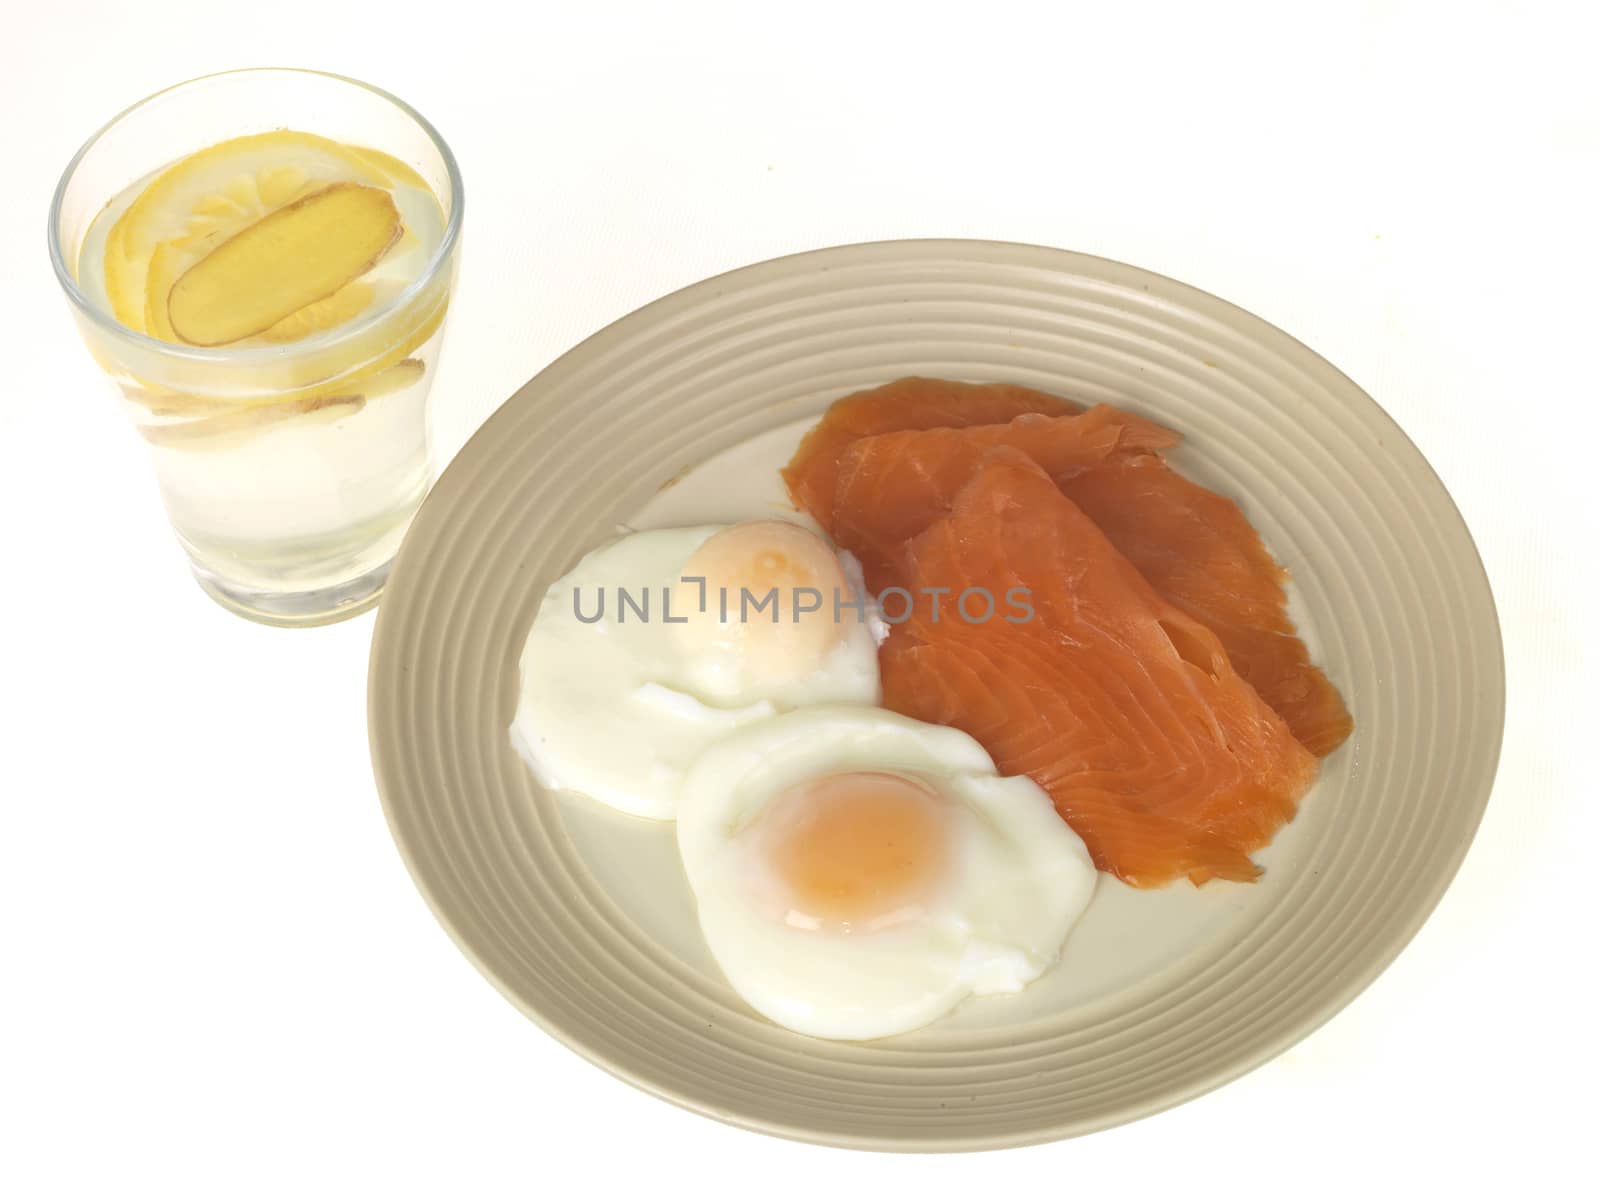 Poached Egg with Smoked Salmon by Whiteboxmedia